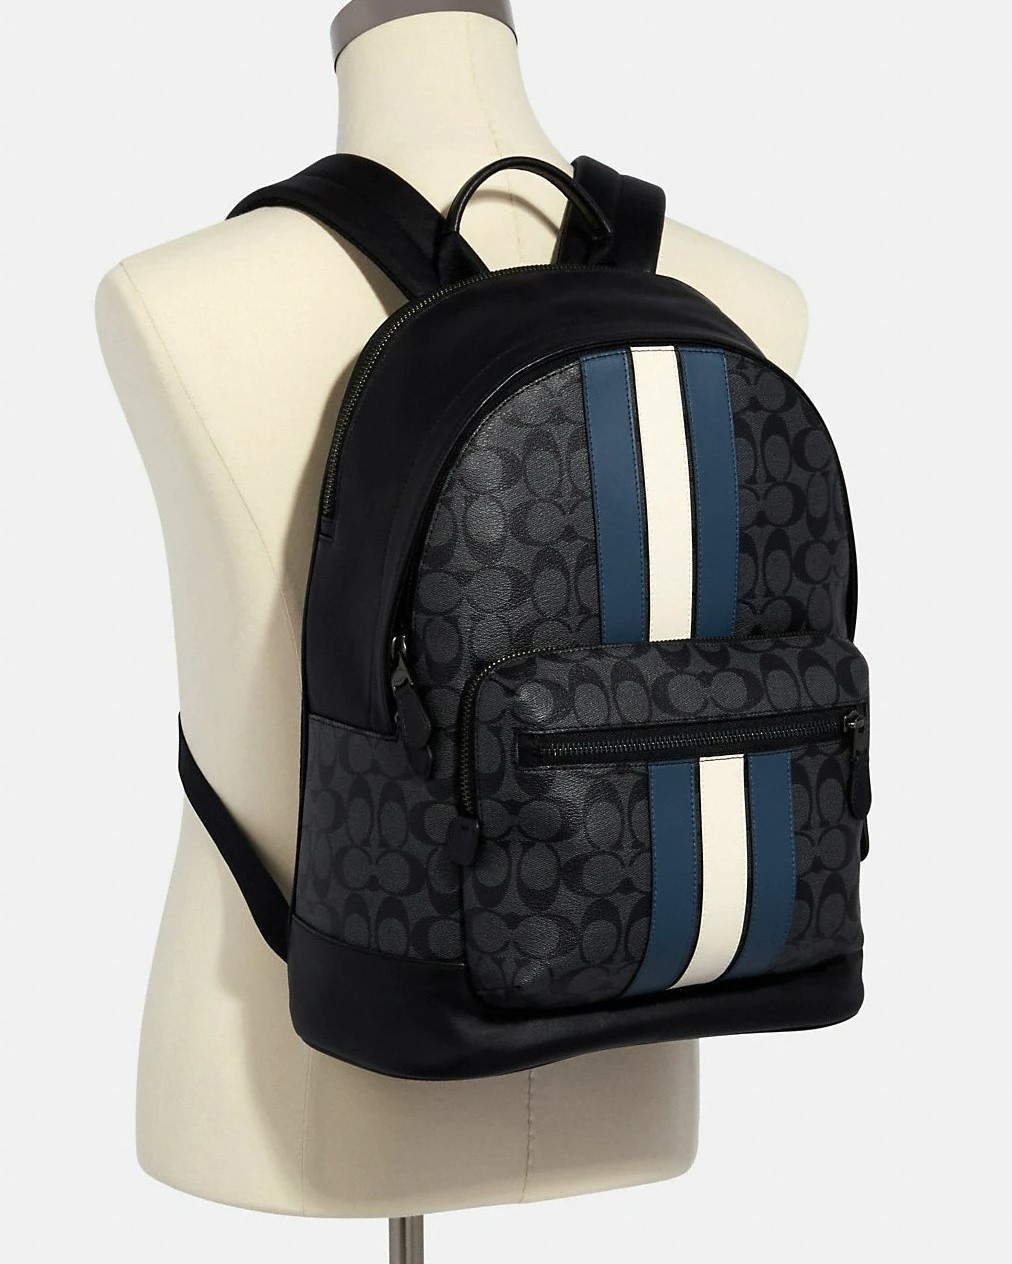 BALO COACH NAM PHỐI SỌC XANH TRẮNG WEST BACKPACK IN SIGNATURE CANVAS WITH VARSITY STRIPE 3